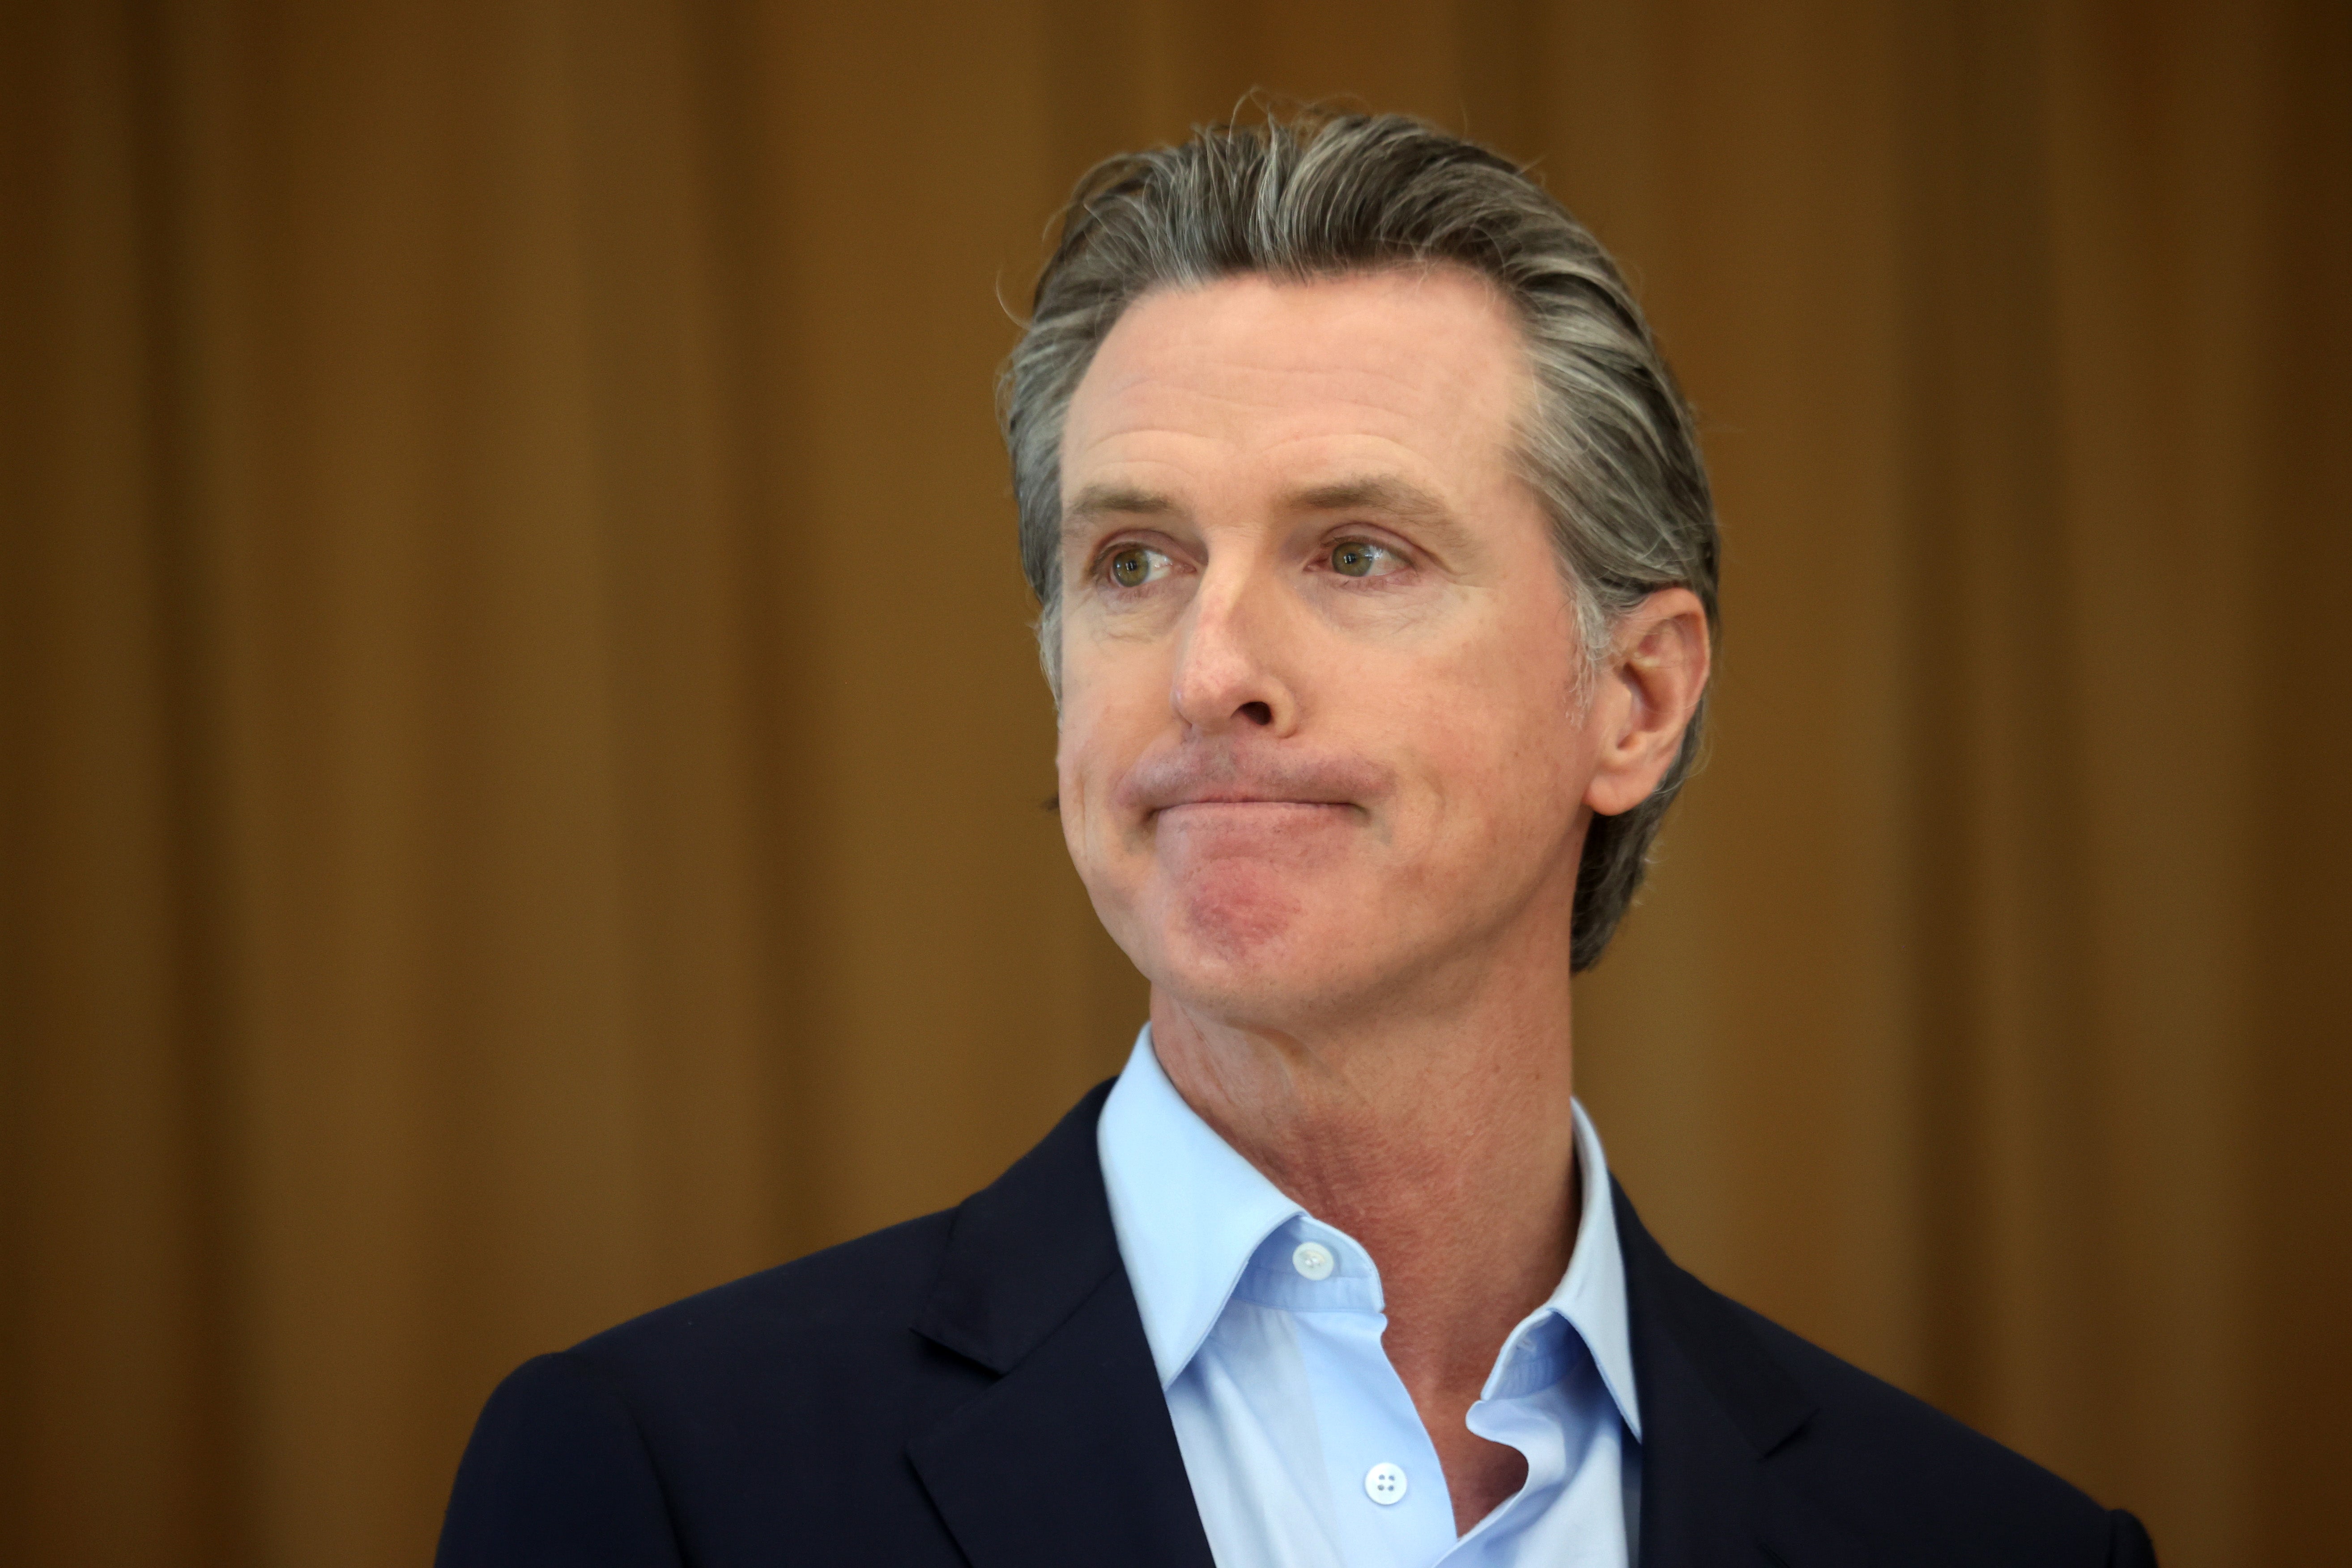 California Gov. Gavin Newsom looks on during a news conference after he toured the newly reopened Ruby Bridges Elementary School on March 16, 2021 in Alameda, California.